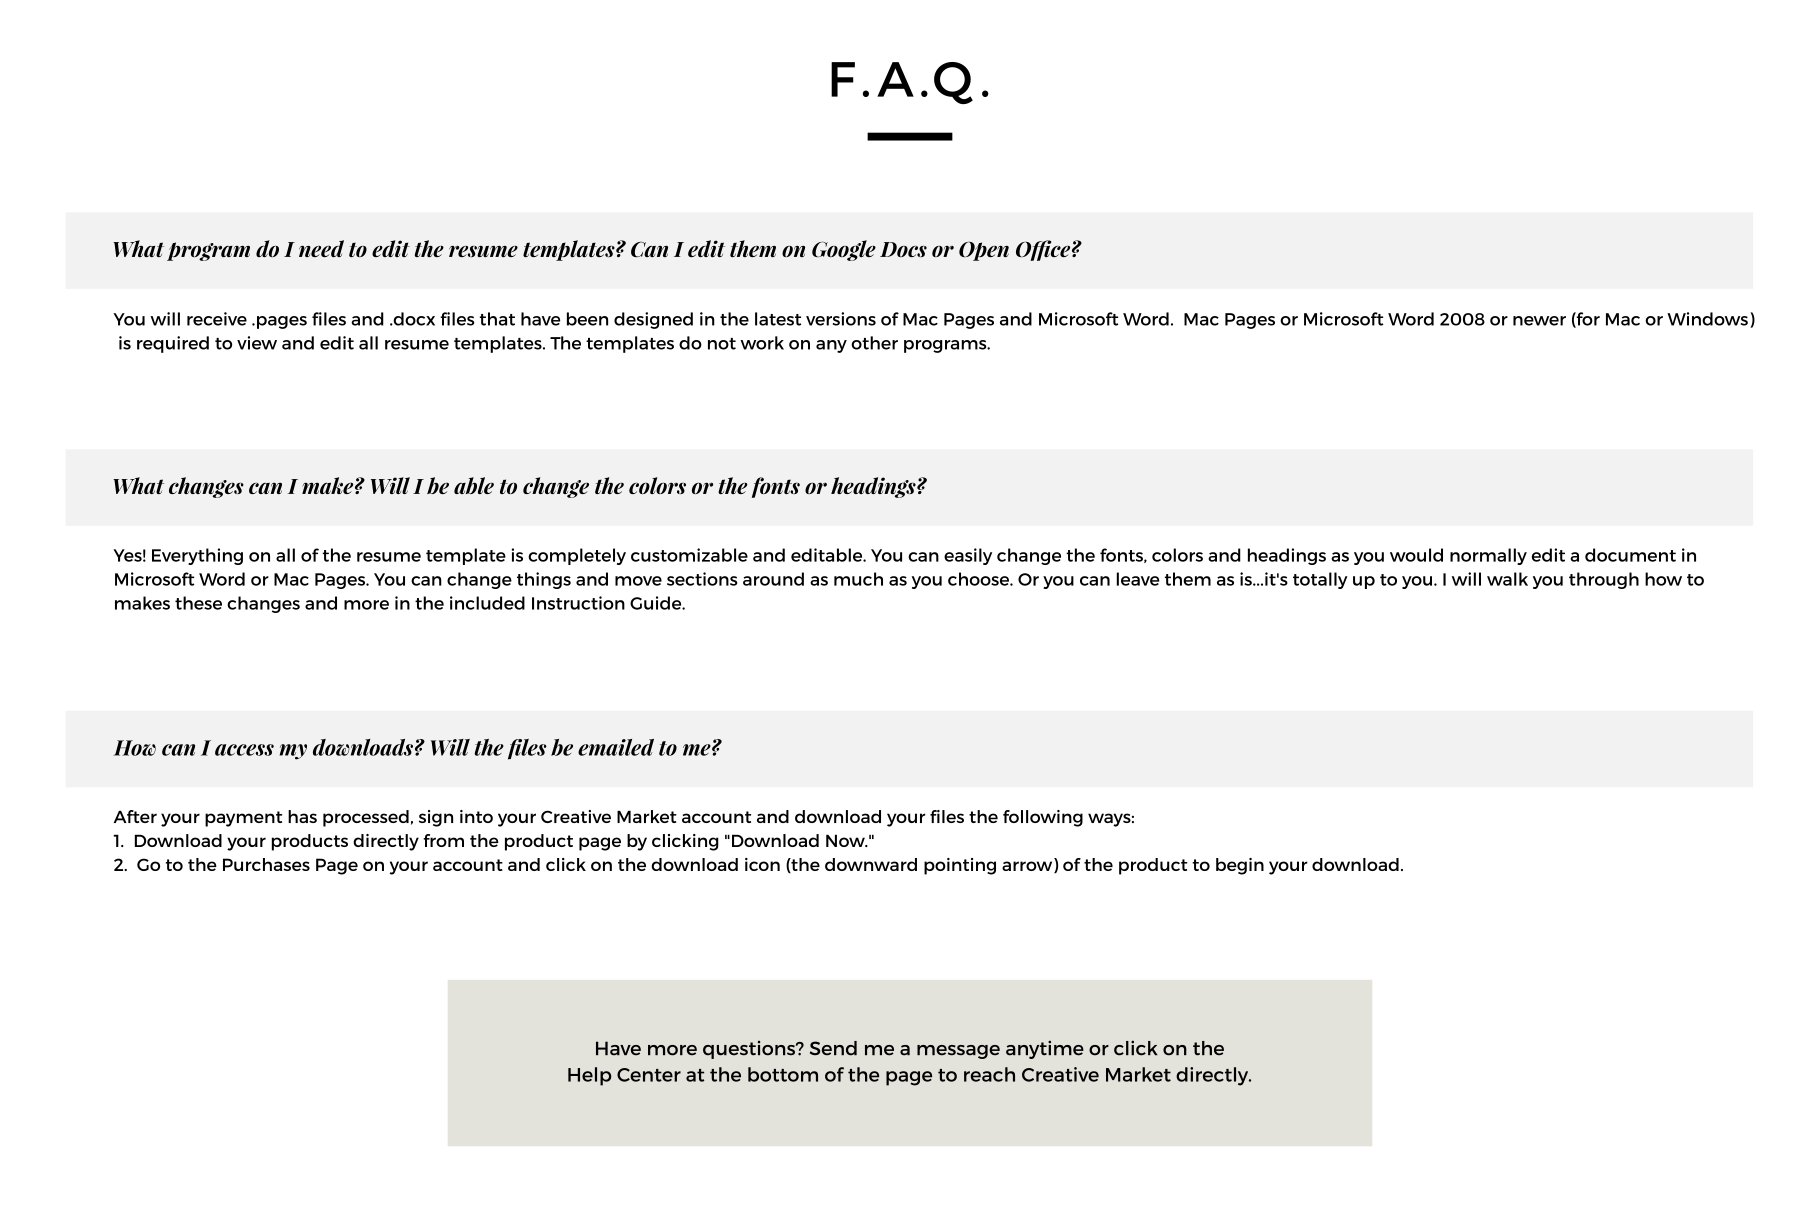 The faq page for a website.